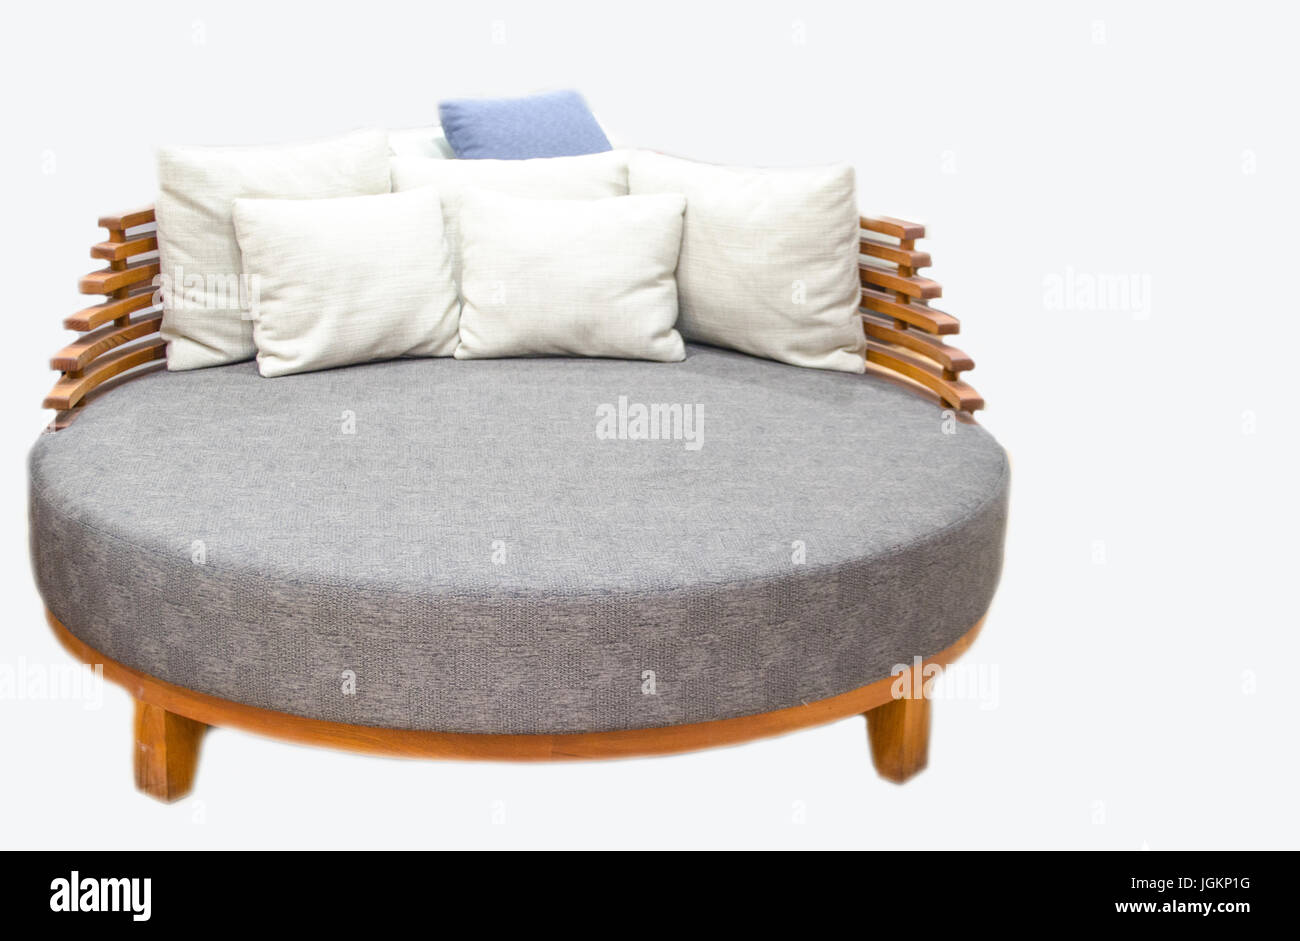 sofa bed for relax on white background Stock Photo